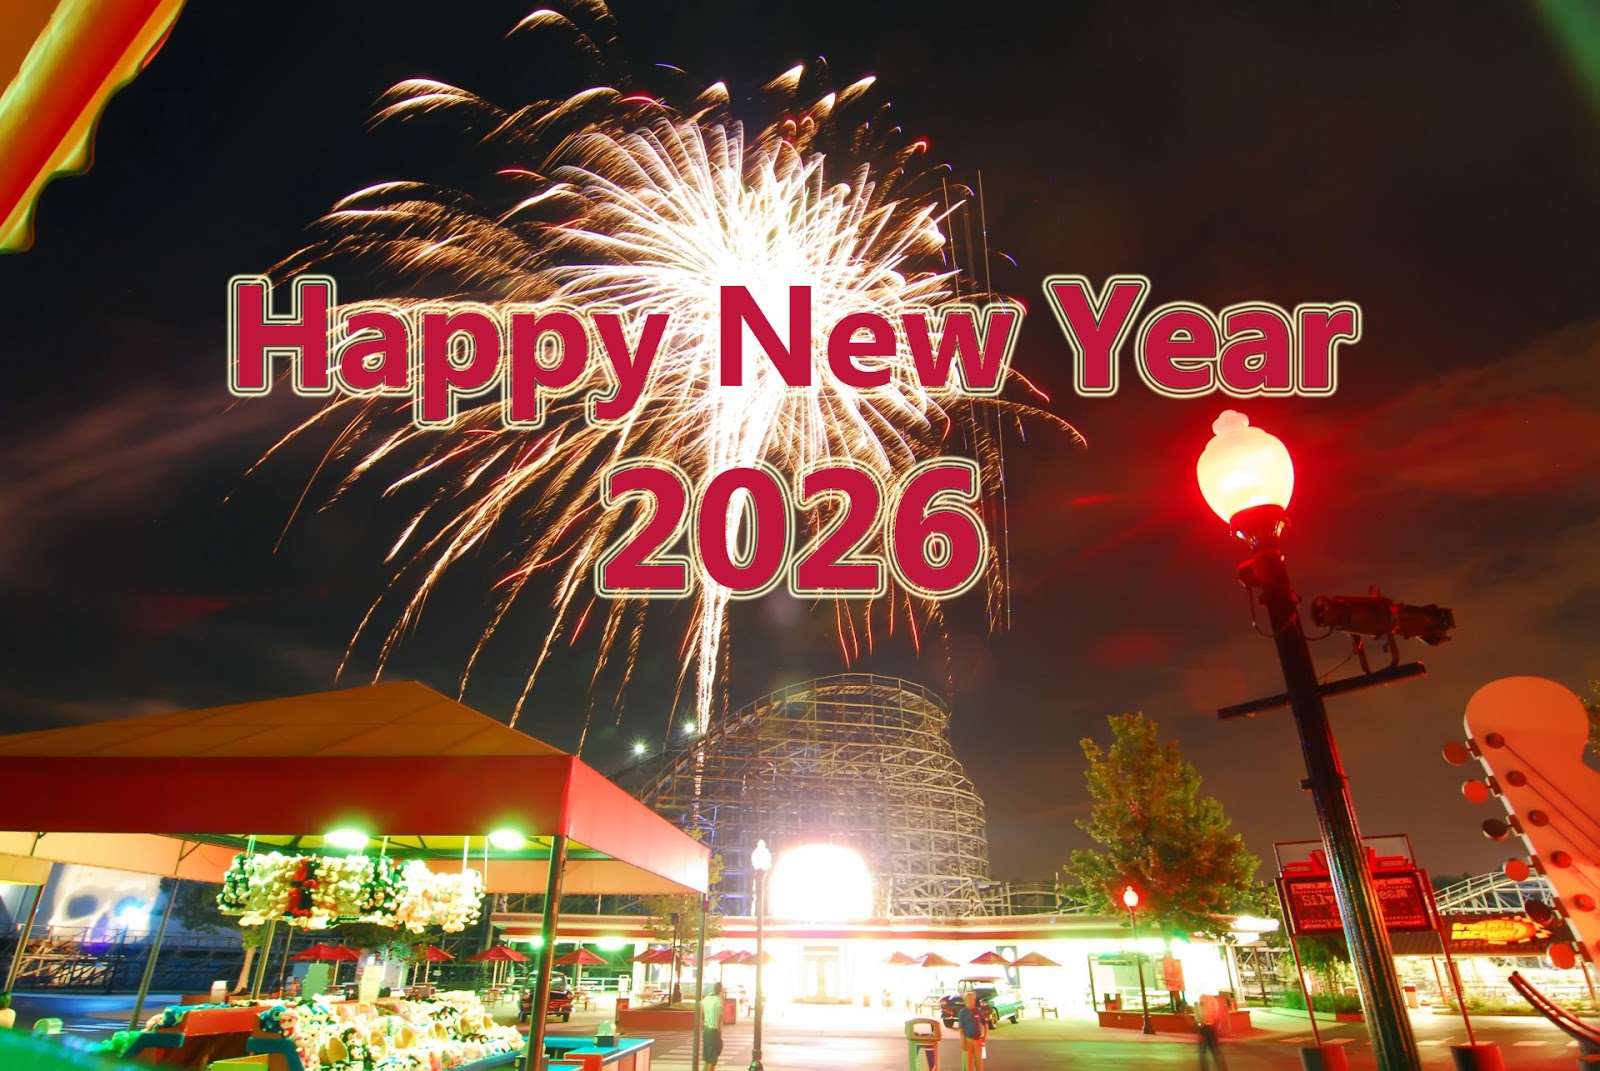 Happy New Year 2026 Wallpapers HD Images 2026 Happy New Year 2026 Wallpapers